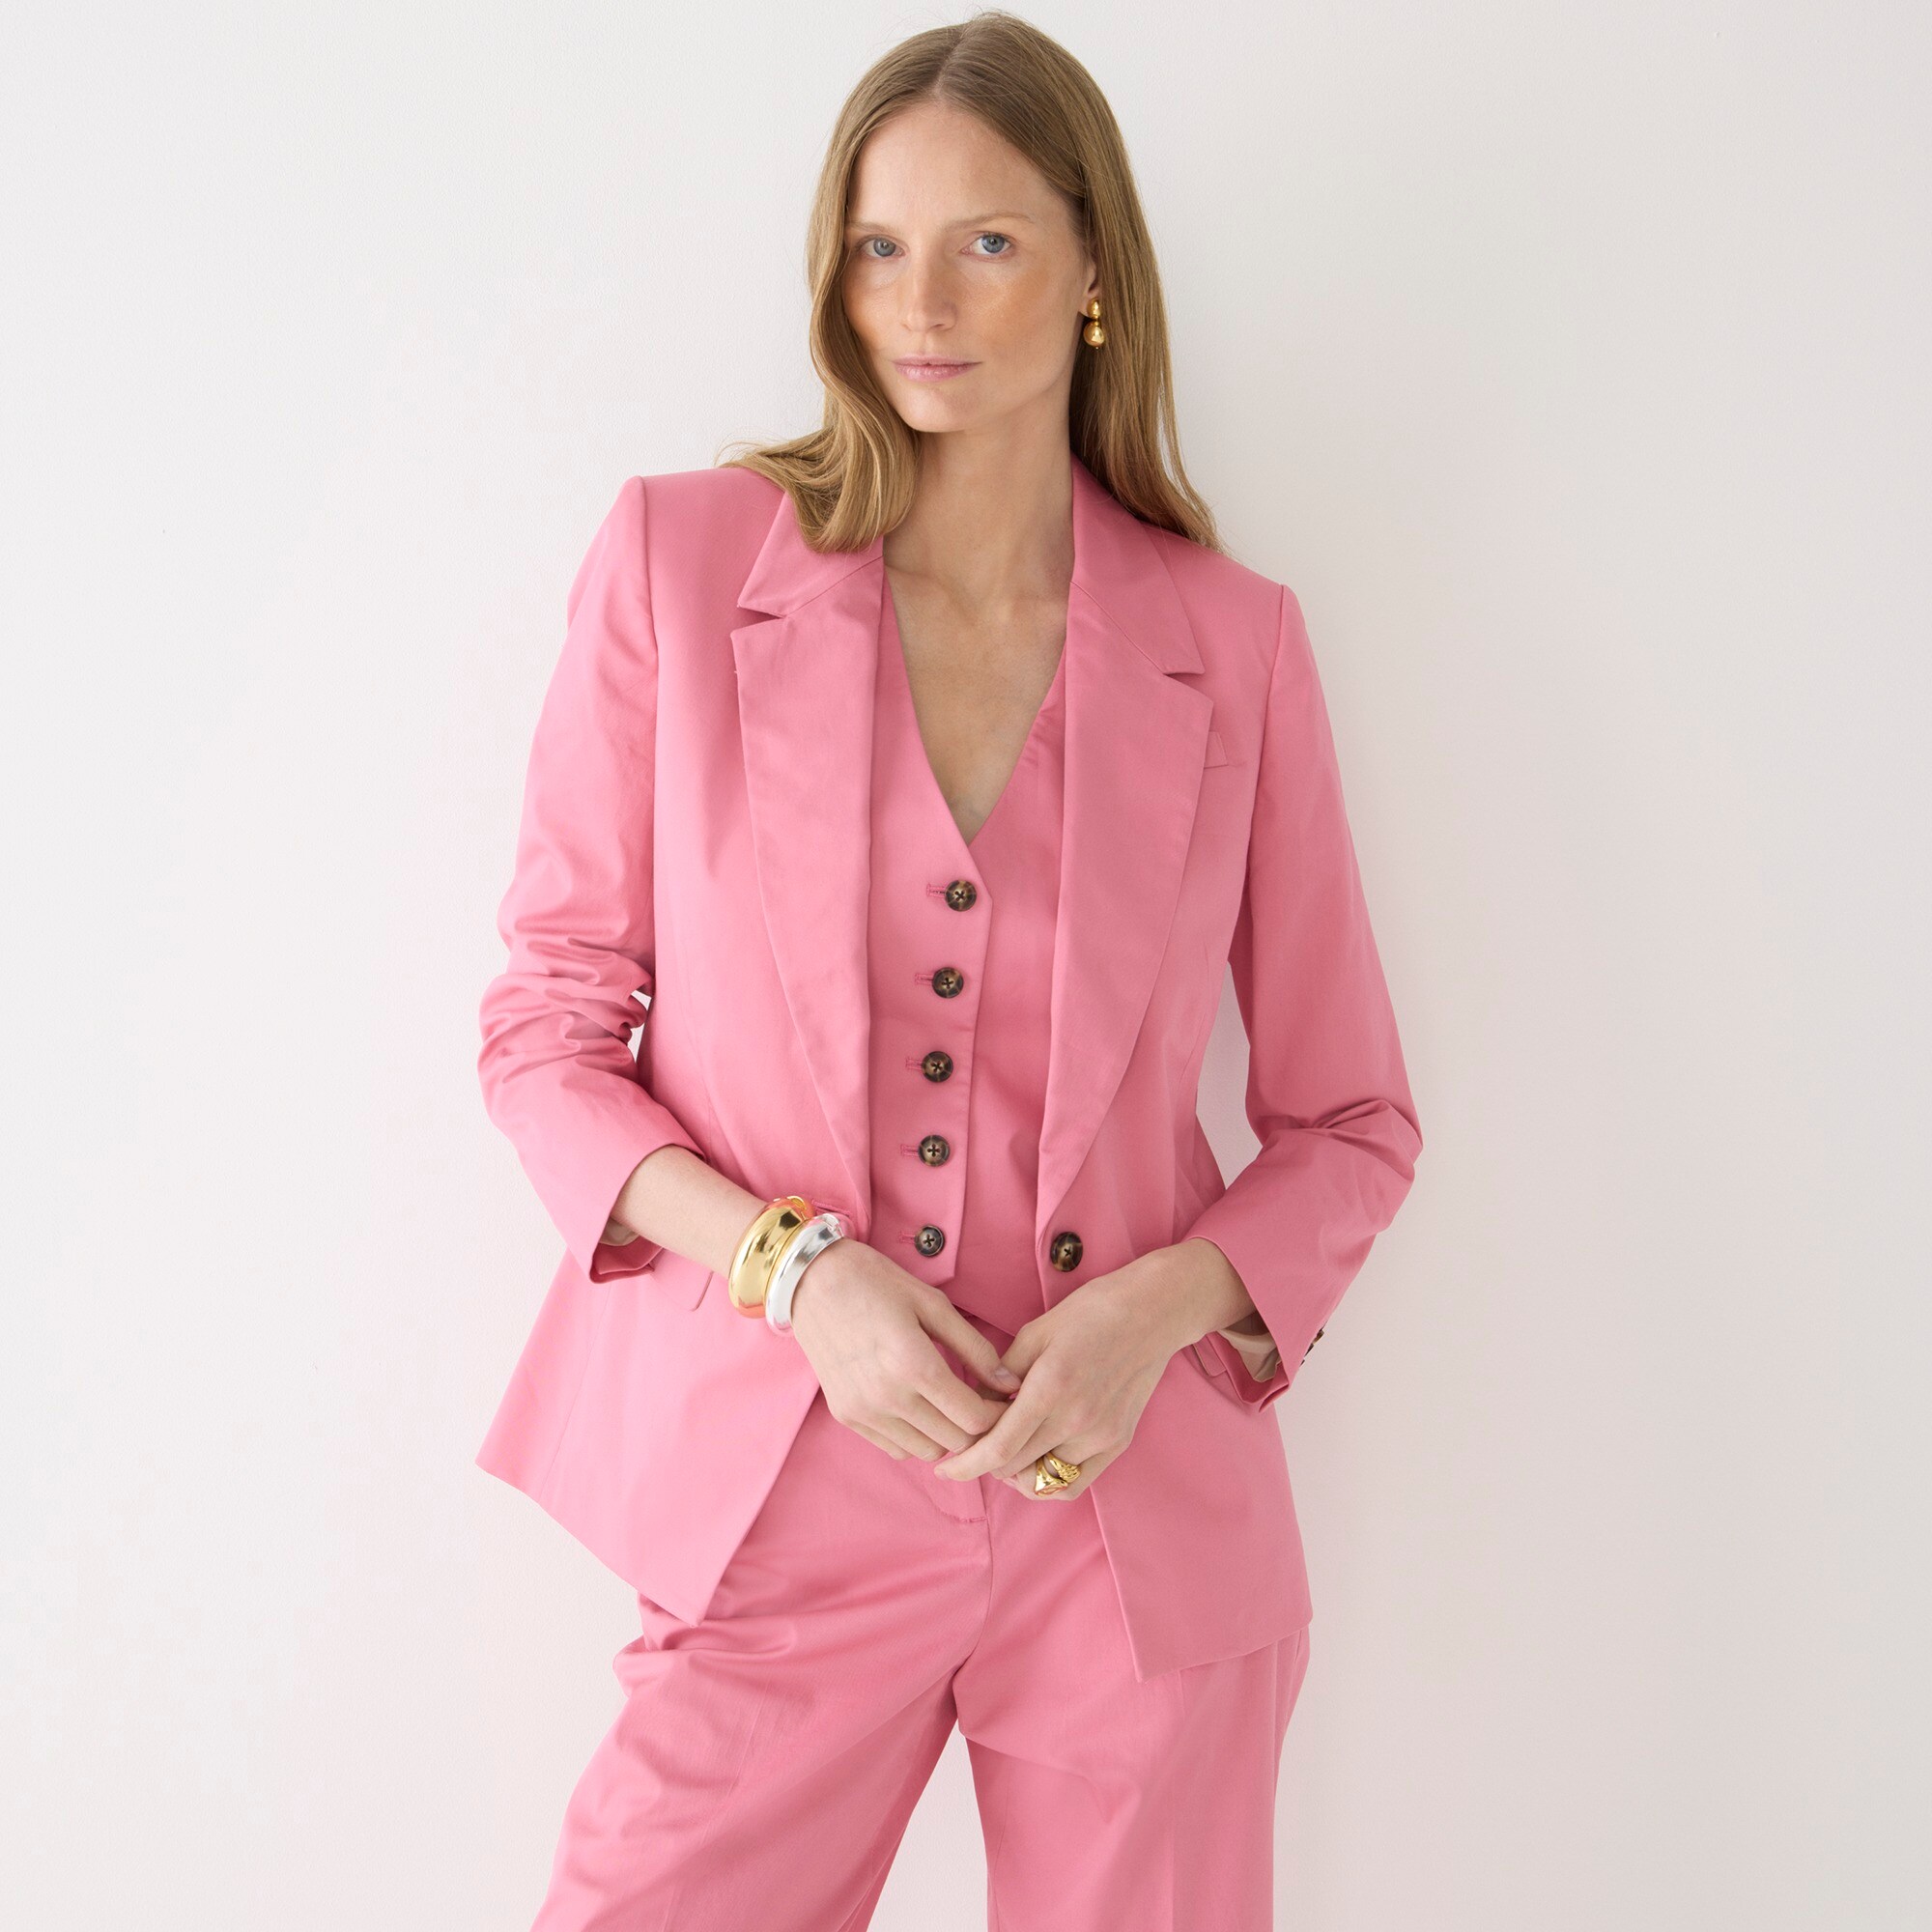 The 25 Best Blazers for Women That Are So Stylish | Who What Wear